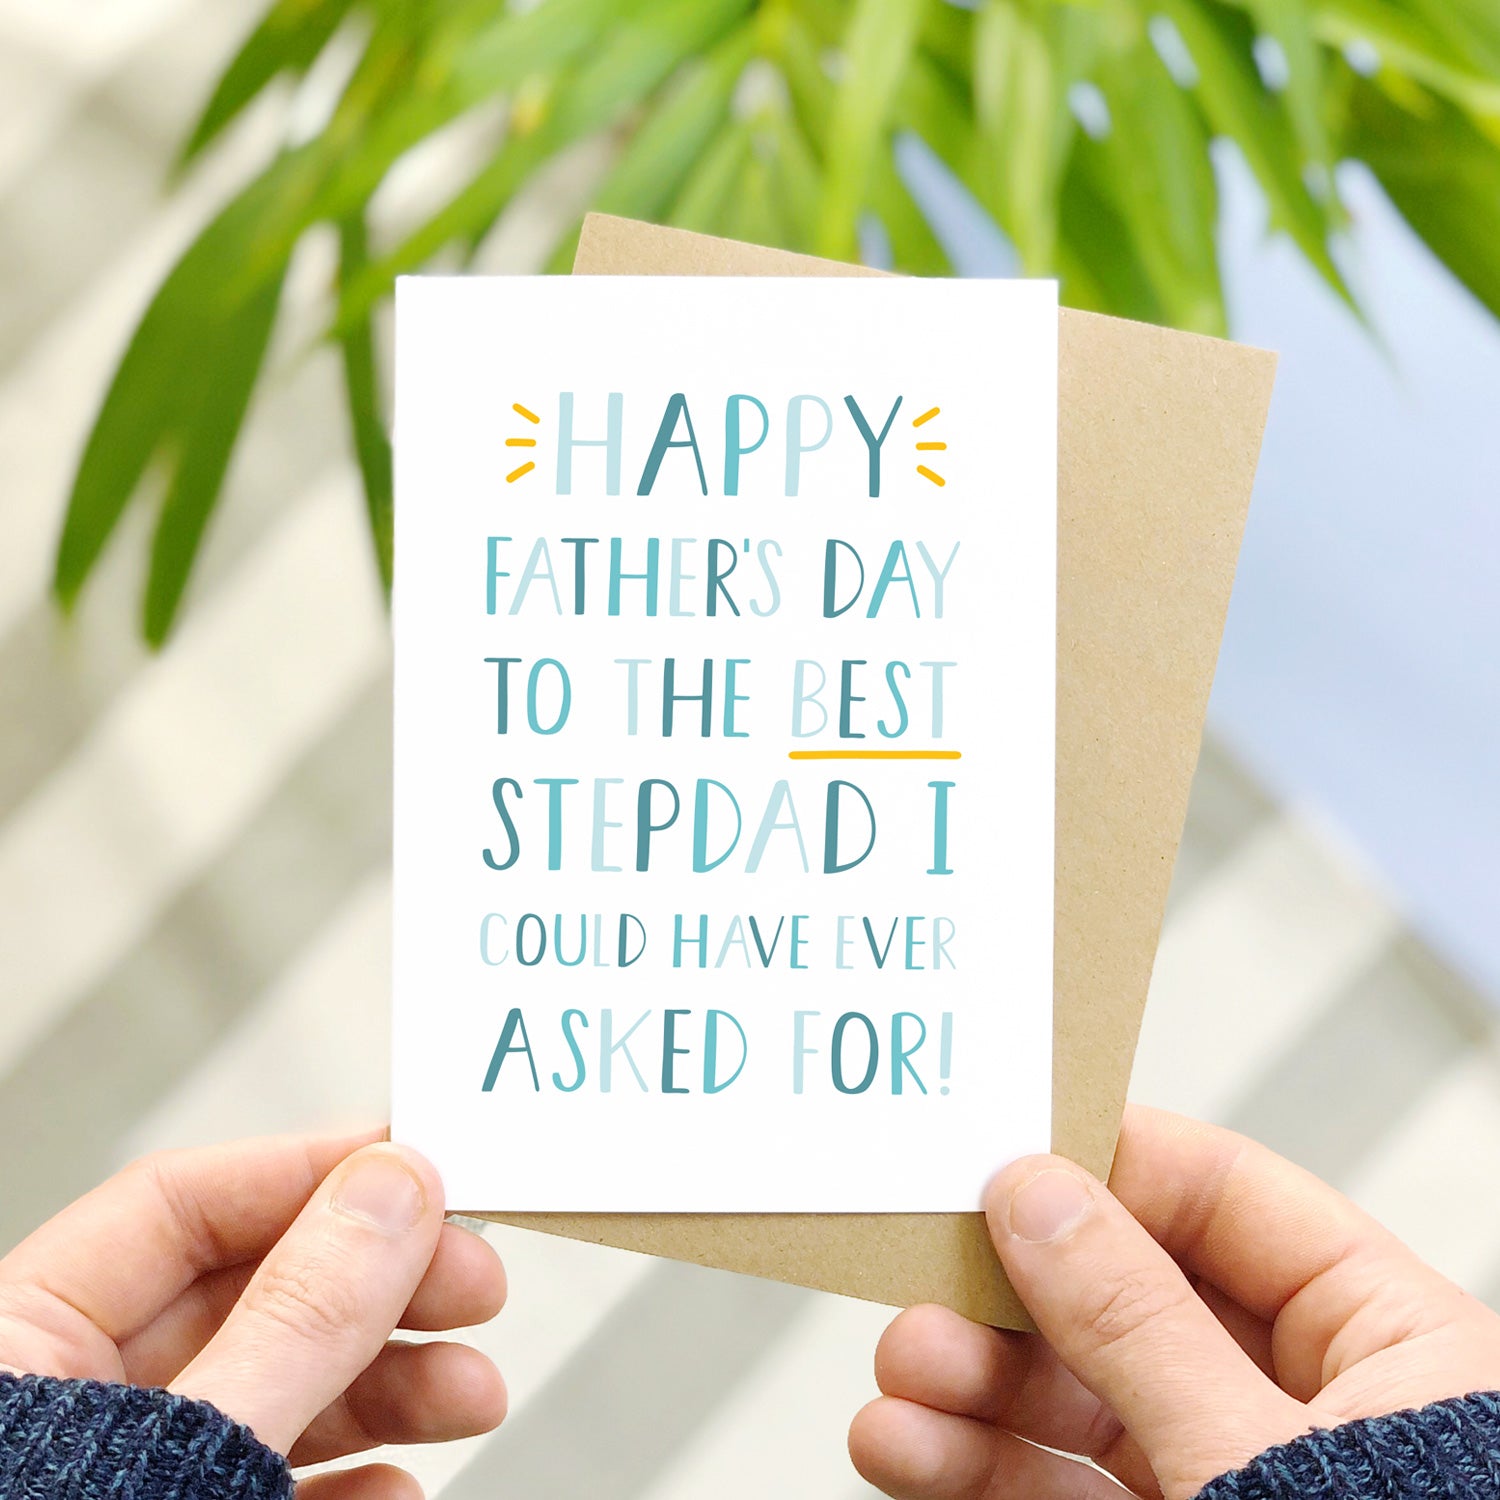 Happy Father's Day to the best stepdad I could have ever asked for Father's Day card. It has been photographed over a grey striped rug with a blue floor and some leafy foliage. It is also being held by a man.